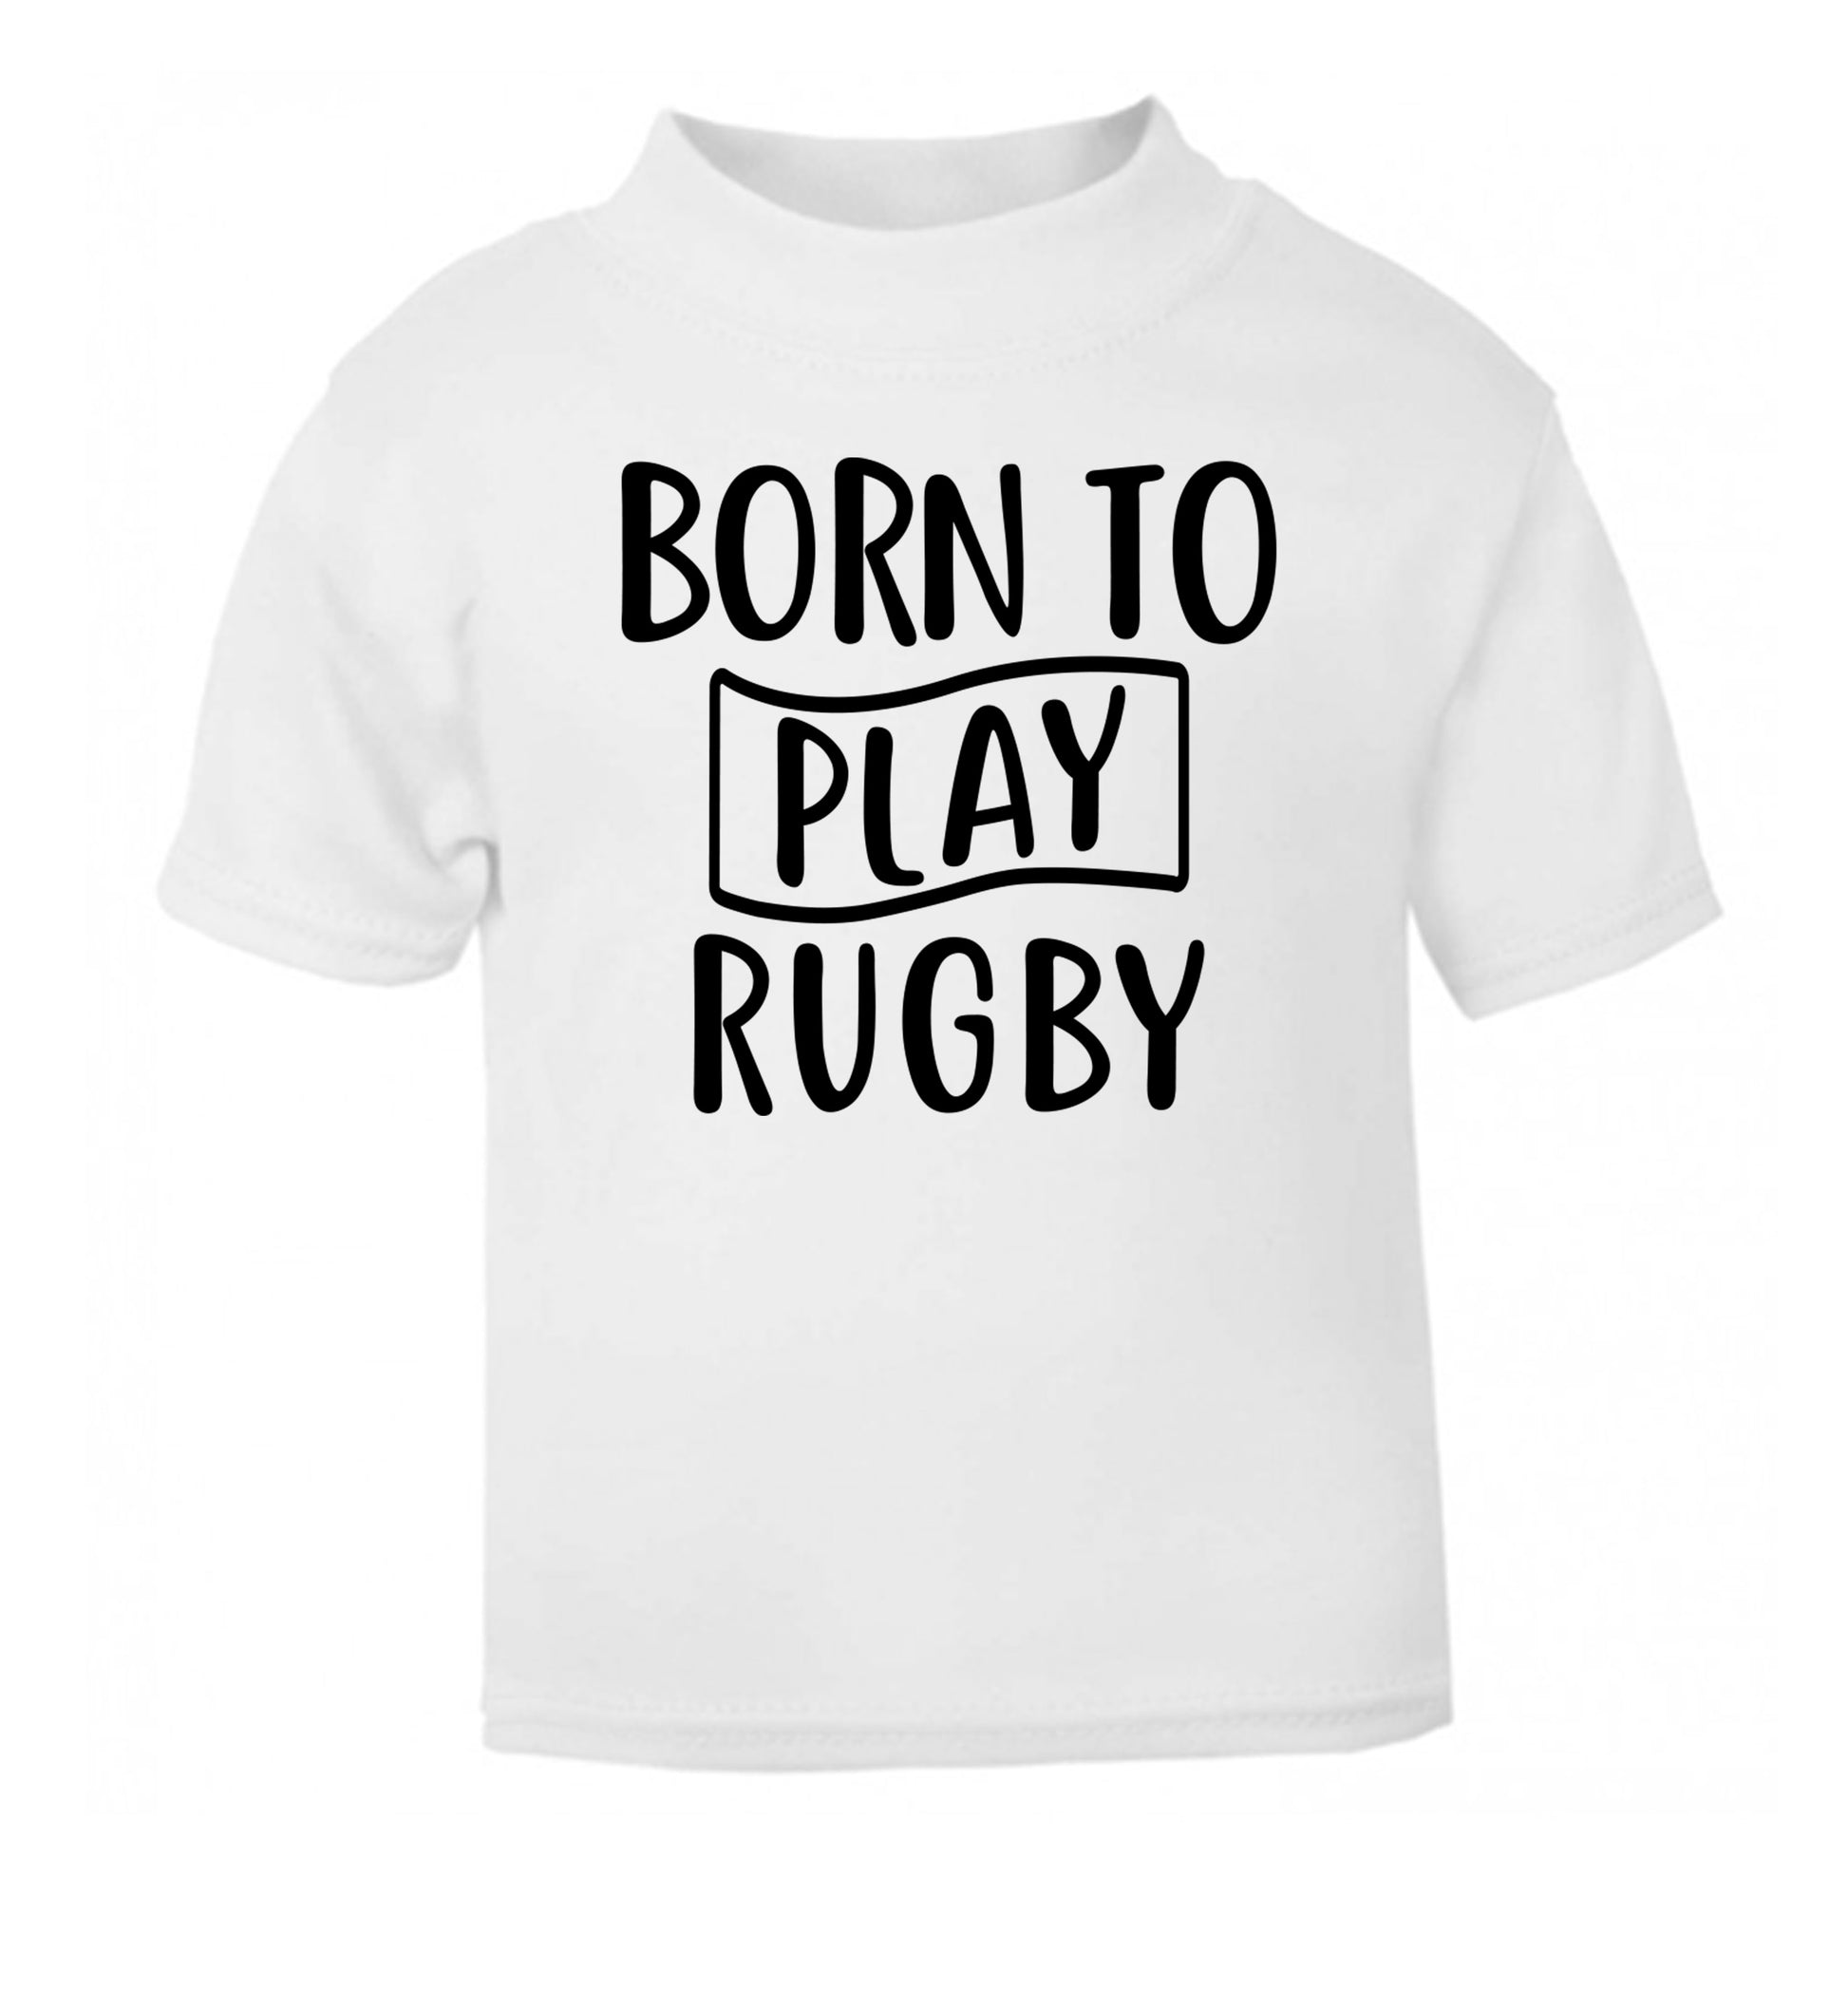 Born to play rugby white Baby Toddler Tshirt 2 Years